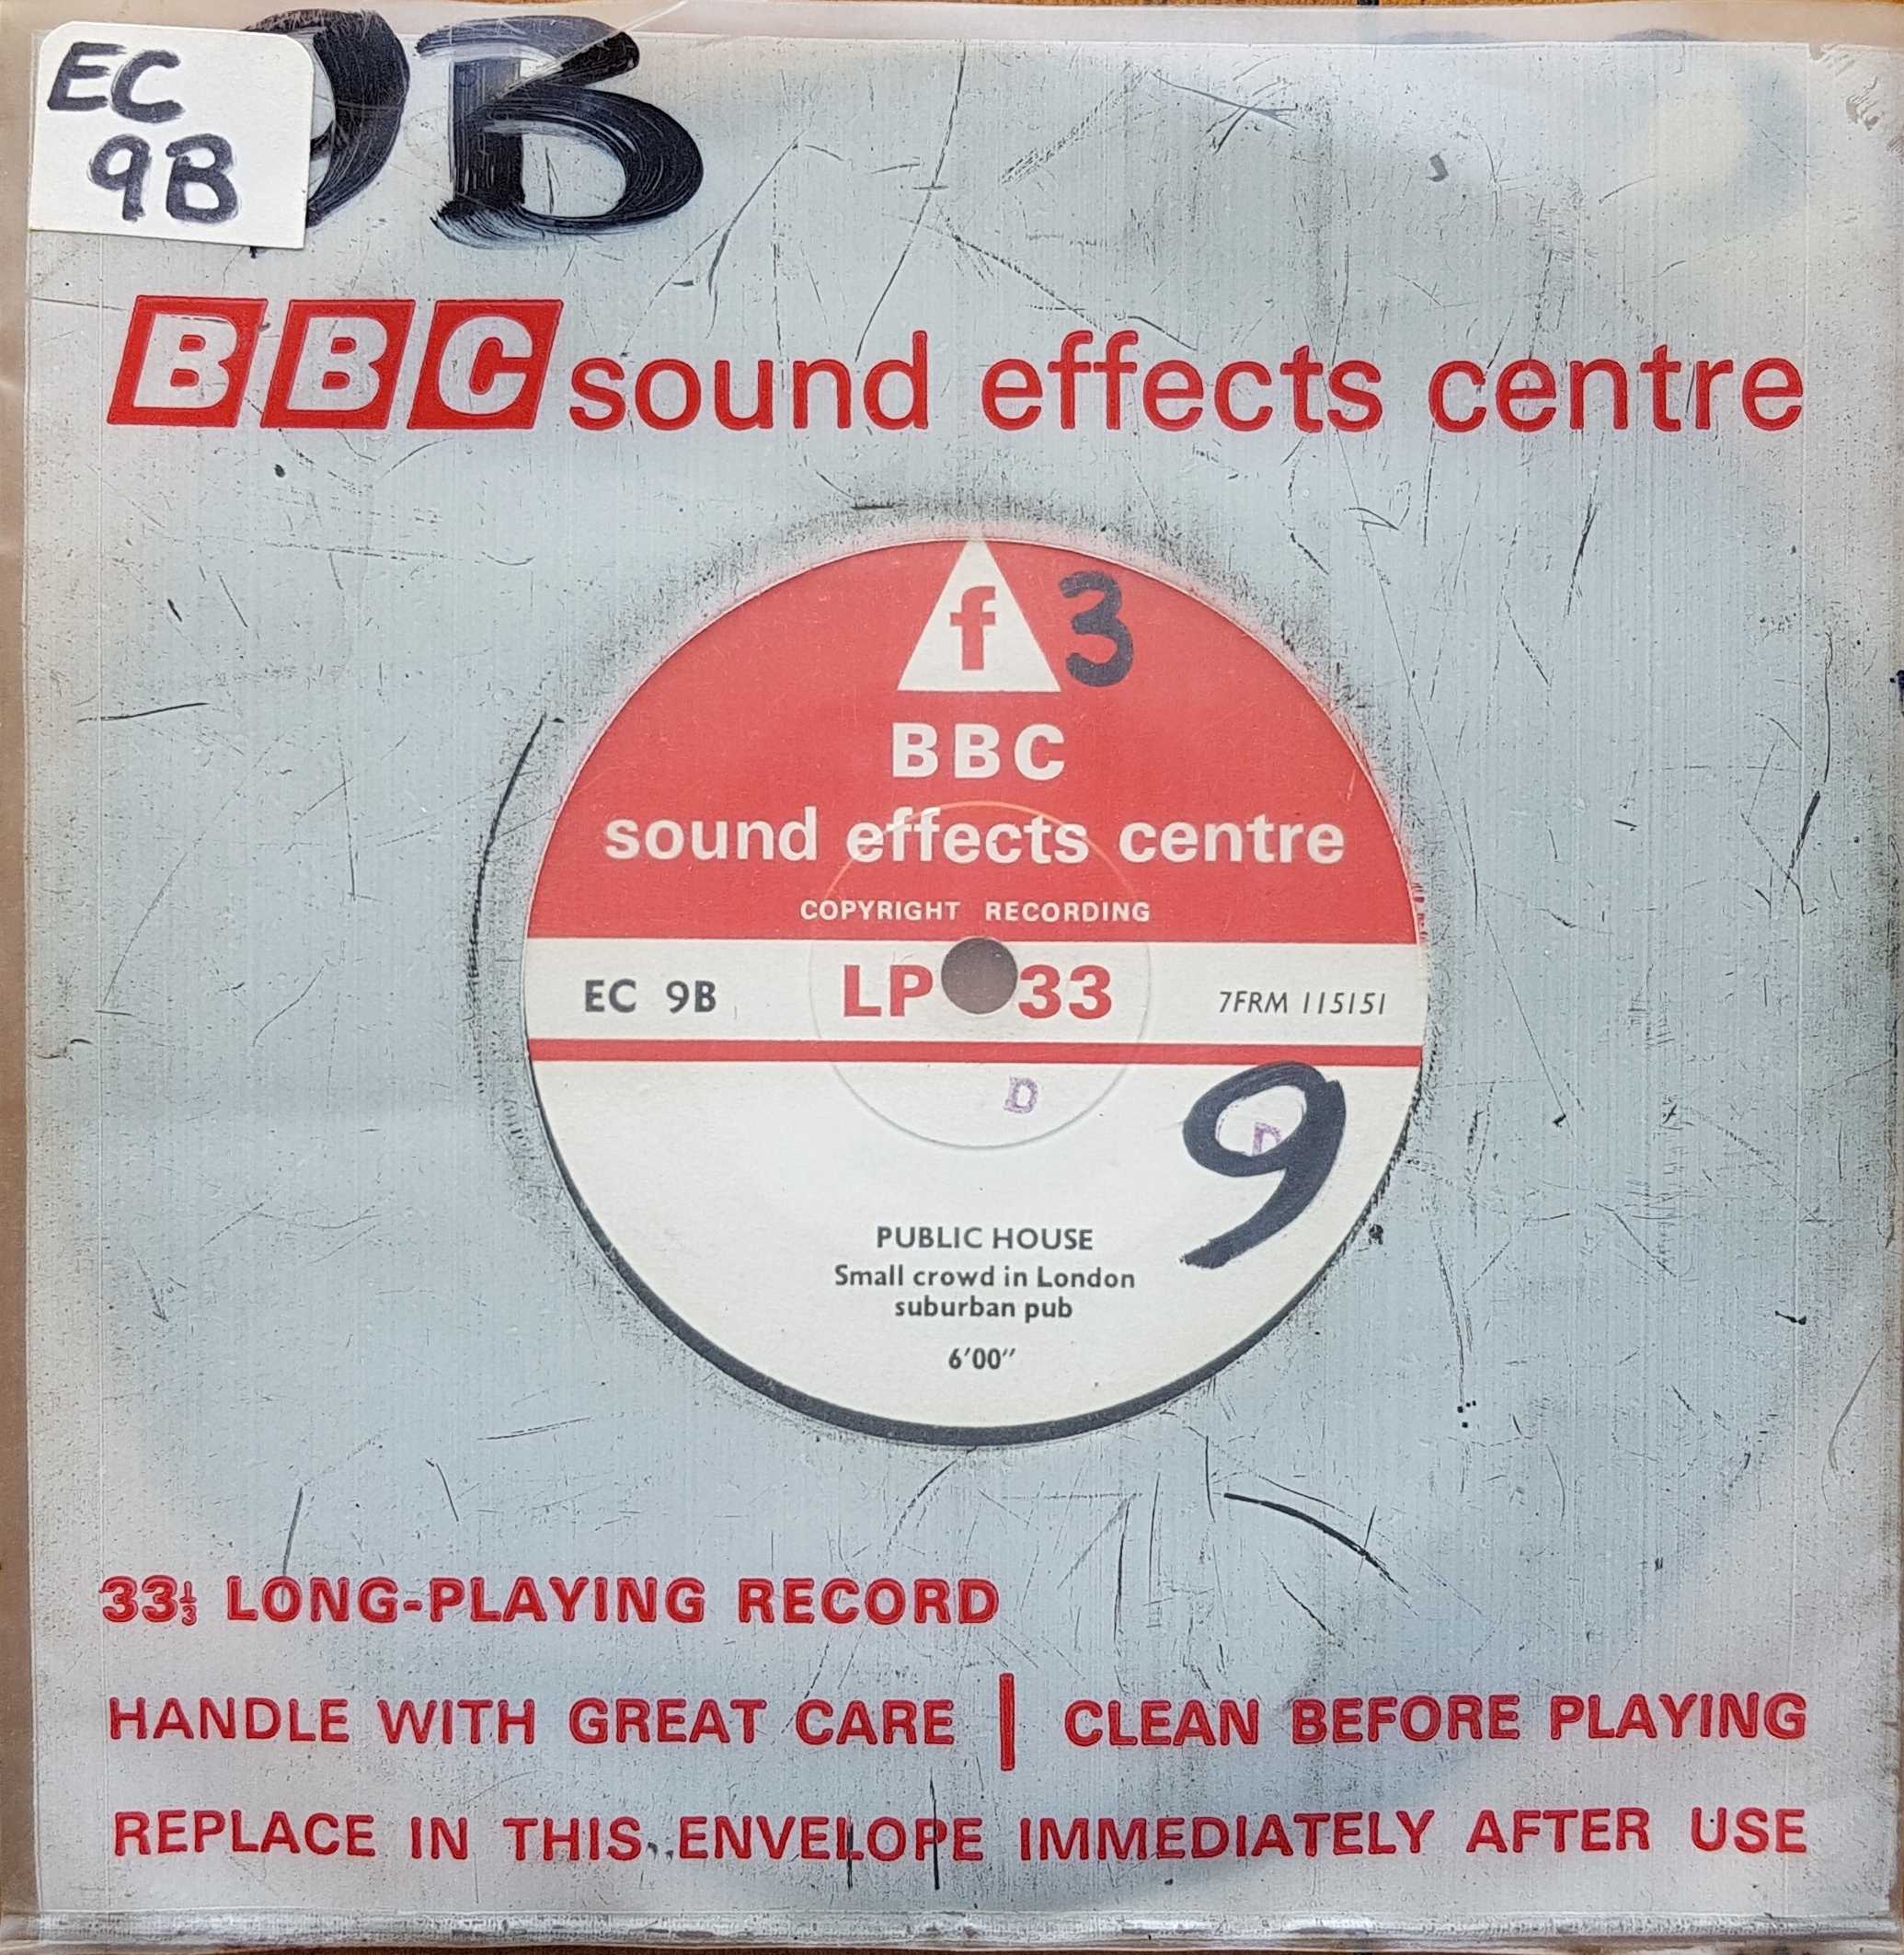 Picture of EC 9B Public House by artist Not registered from the BBC singles - Records and Tapes library